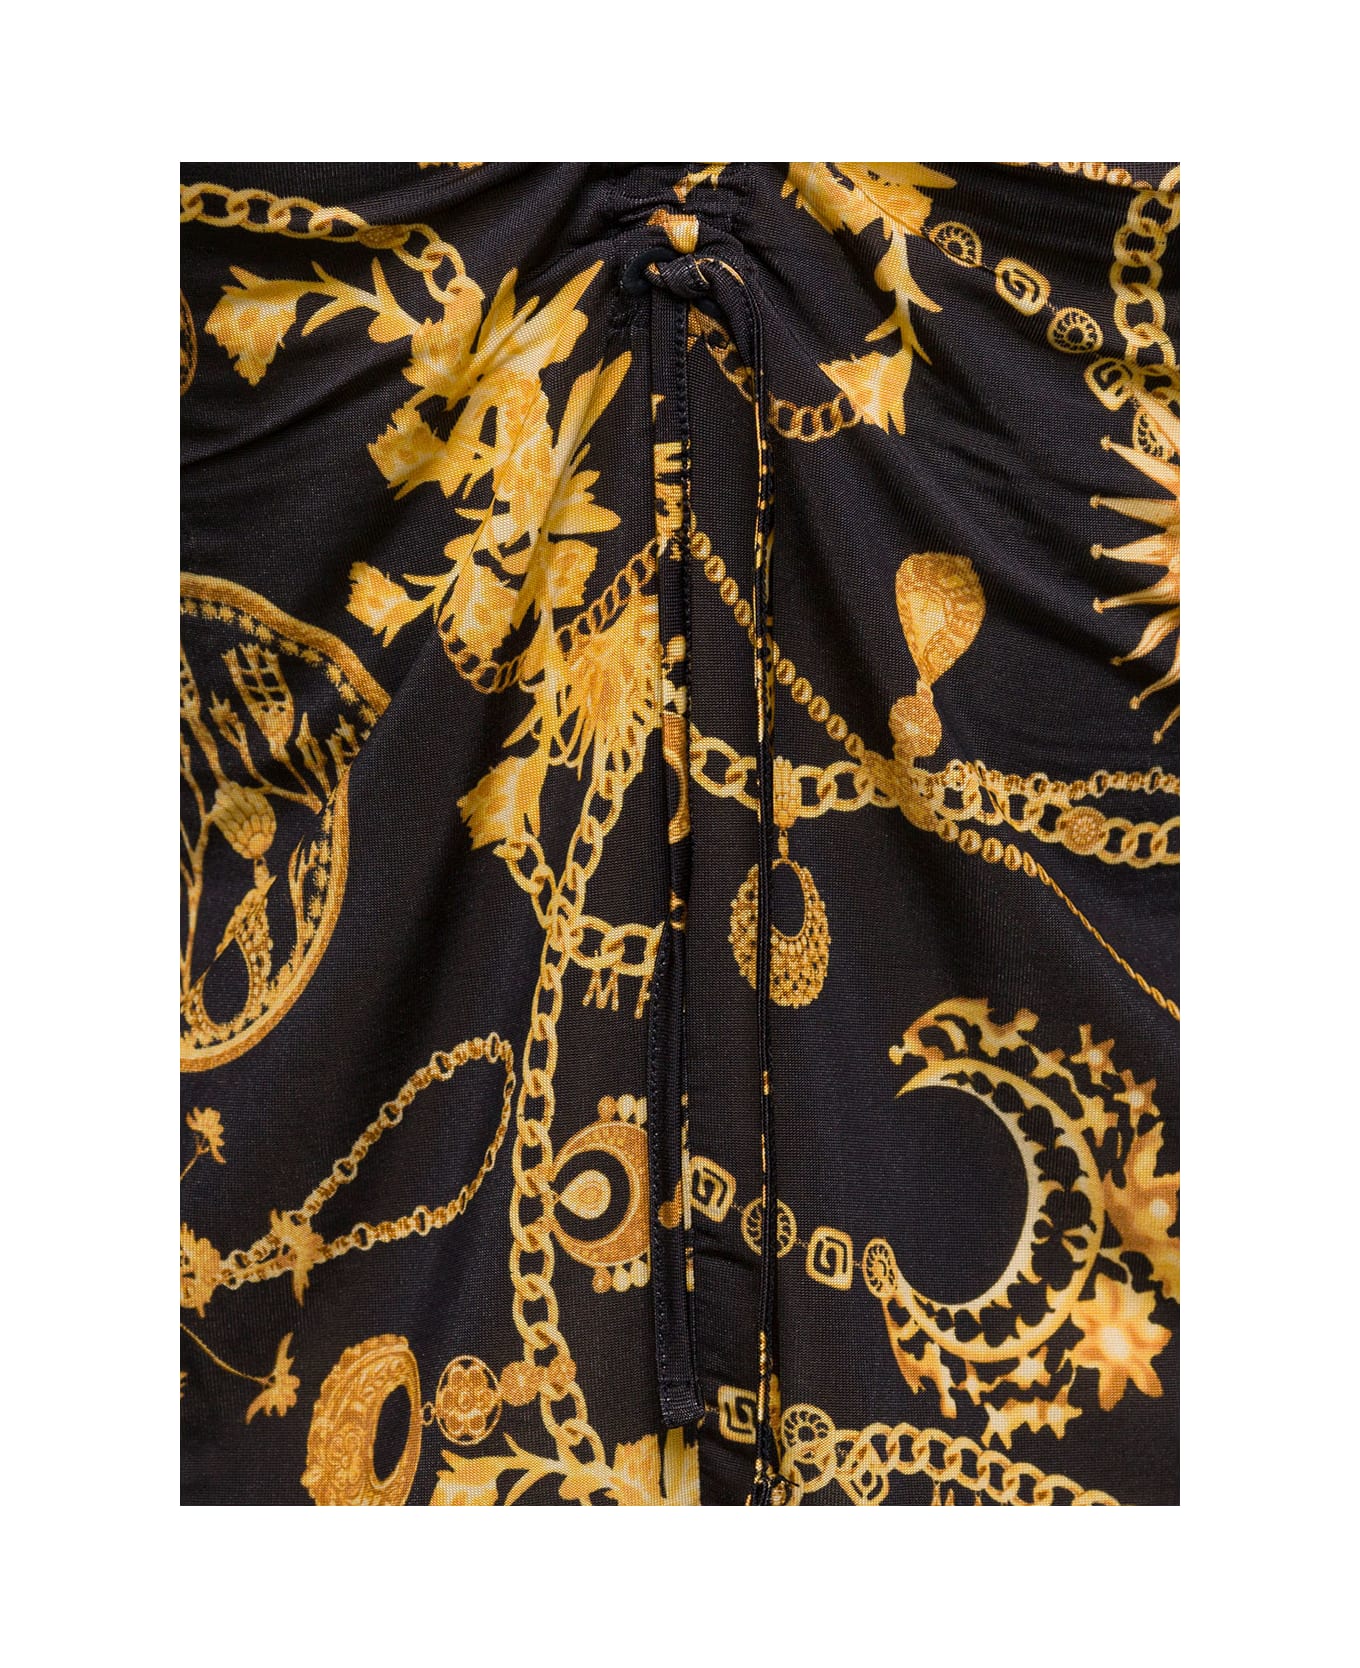 Marine Serre Black Blouse With All-over Graphic Print And Gathering Detail In Stretch Viscose Woman - Black ニットウェア